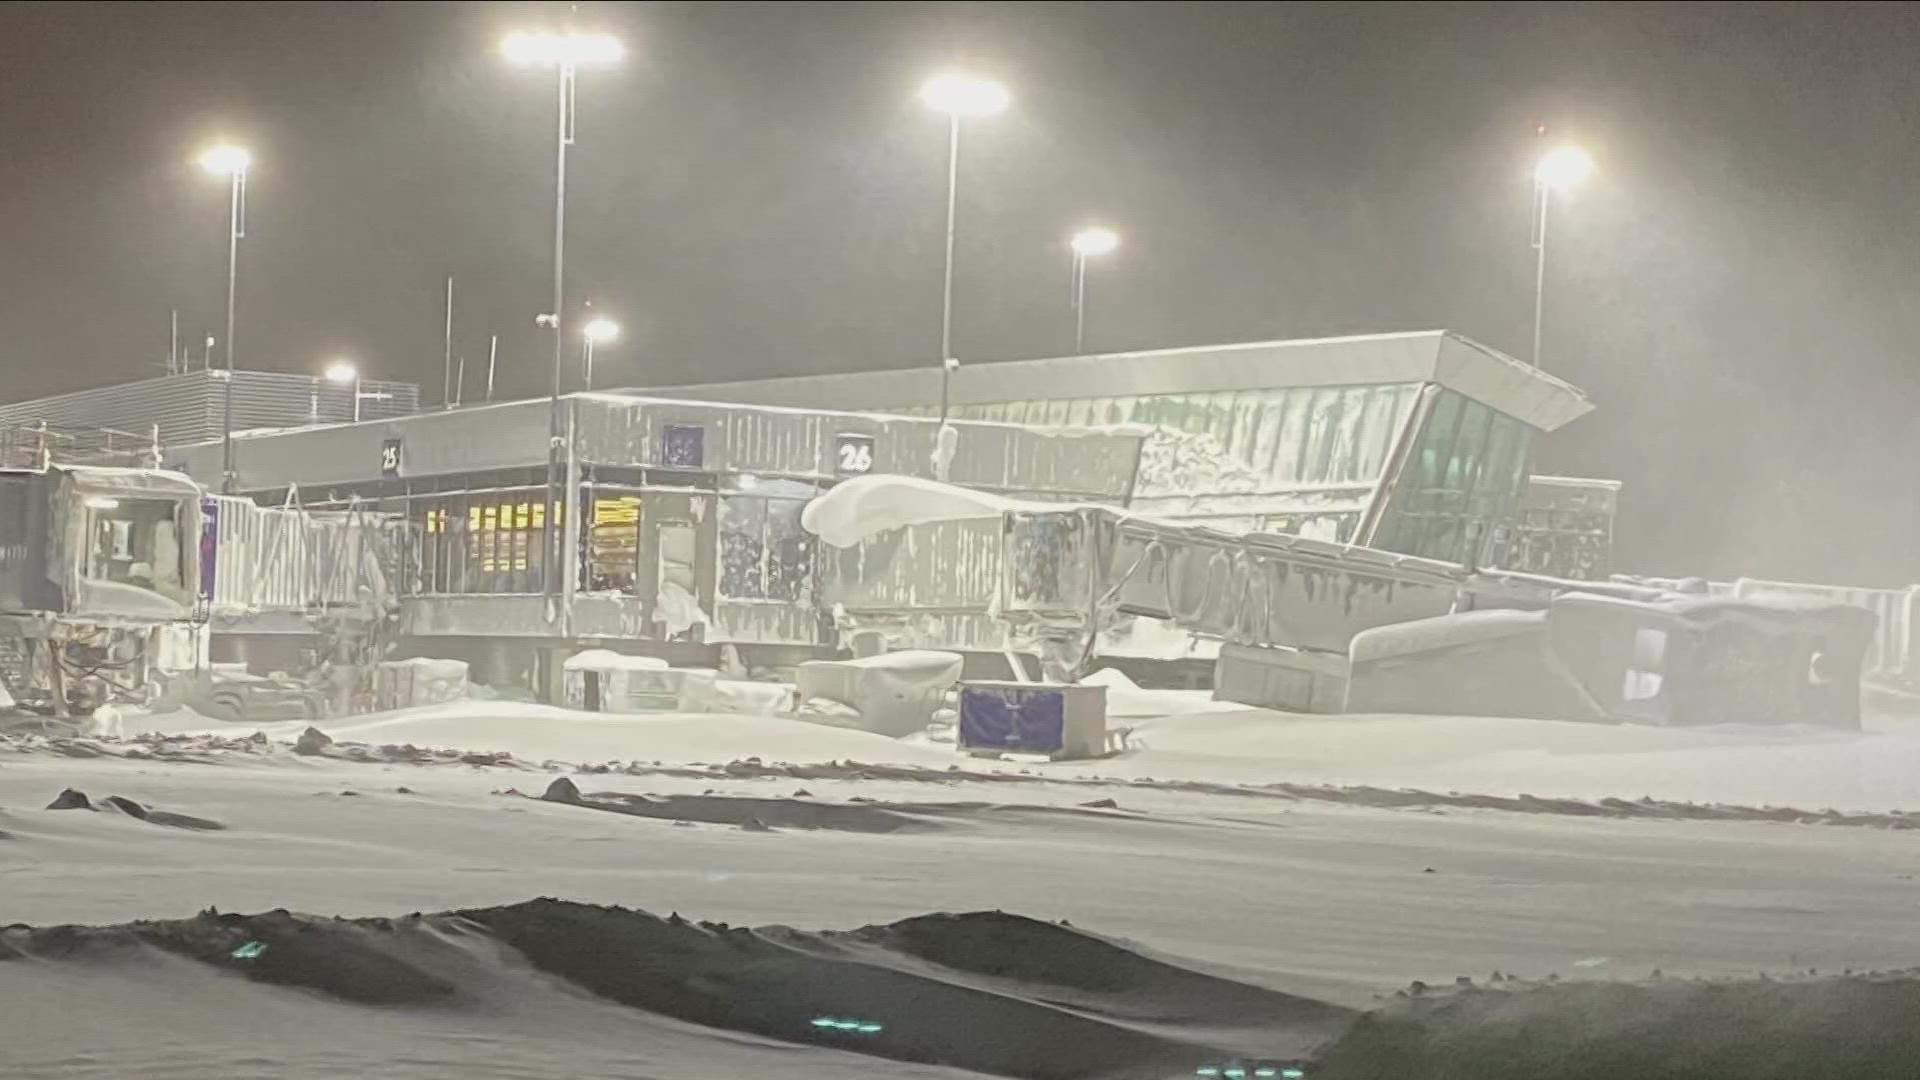 While there were no casualties on airport property during the storm, employees are critical about lack of communication.